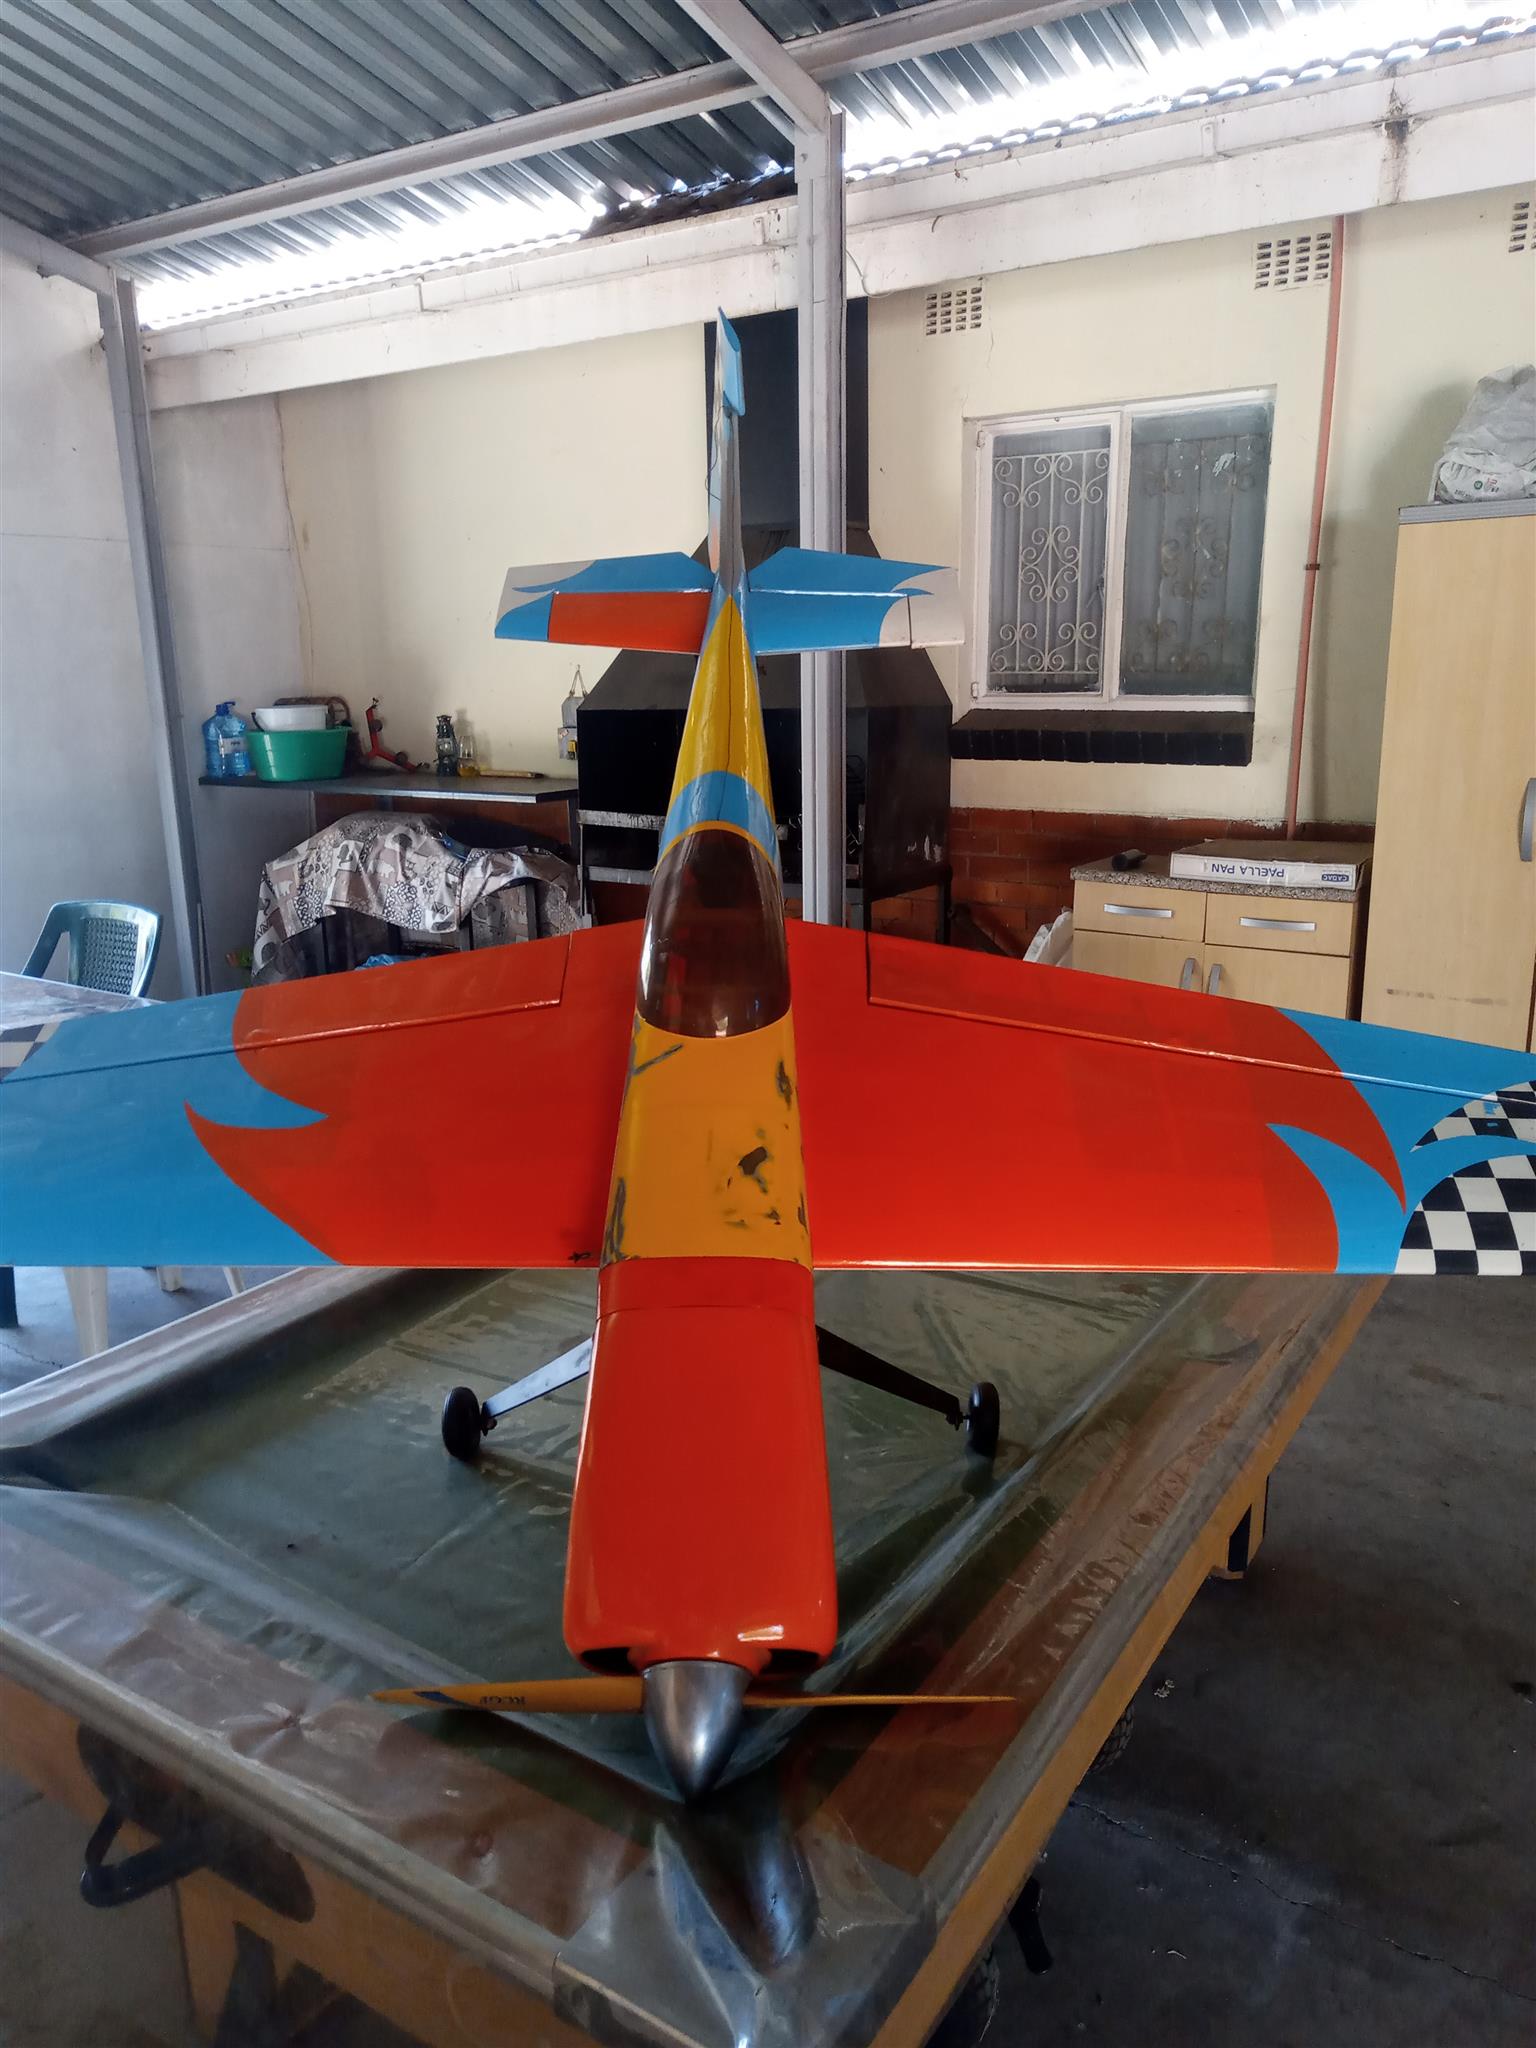 30 % Scale Edge 540 arobatic radio controlled plane with 43cc petrol engine and all servo's complete